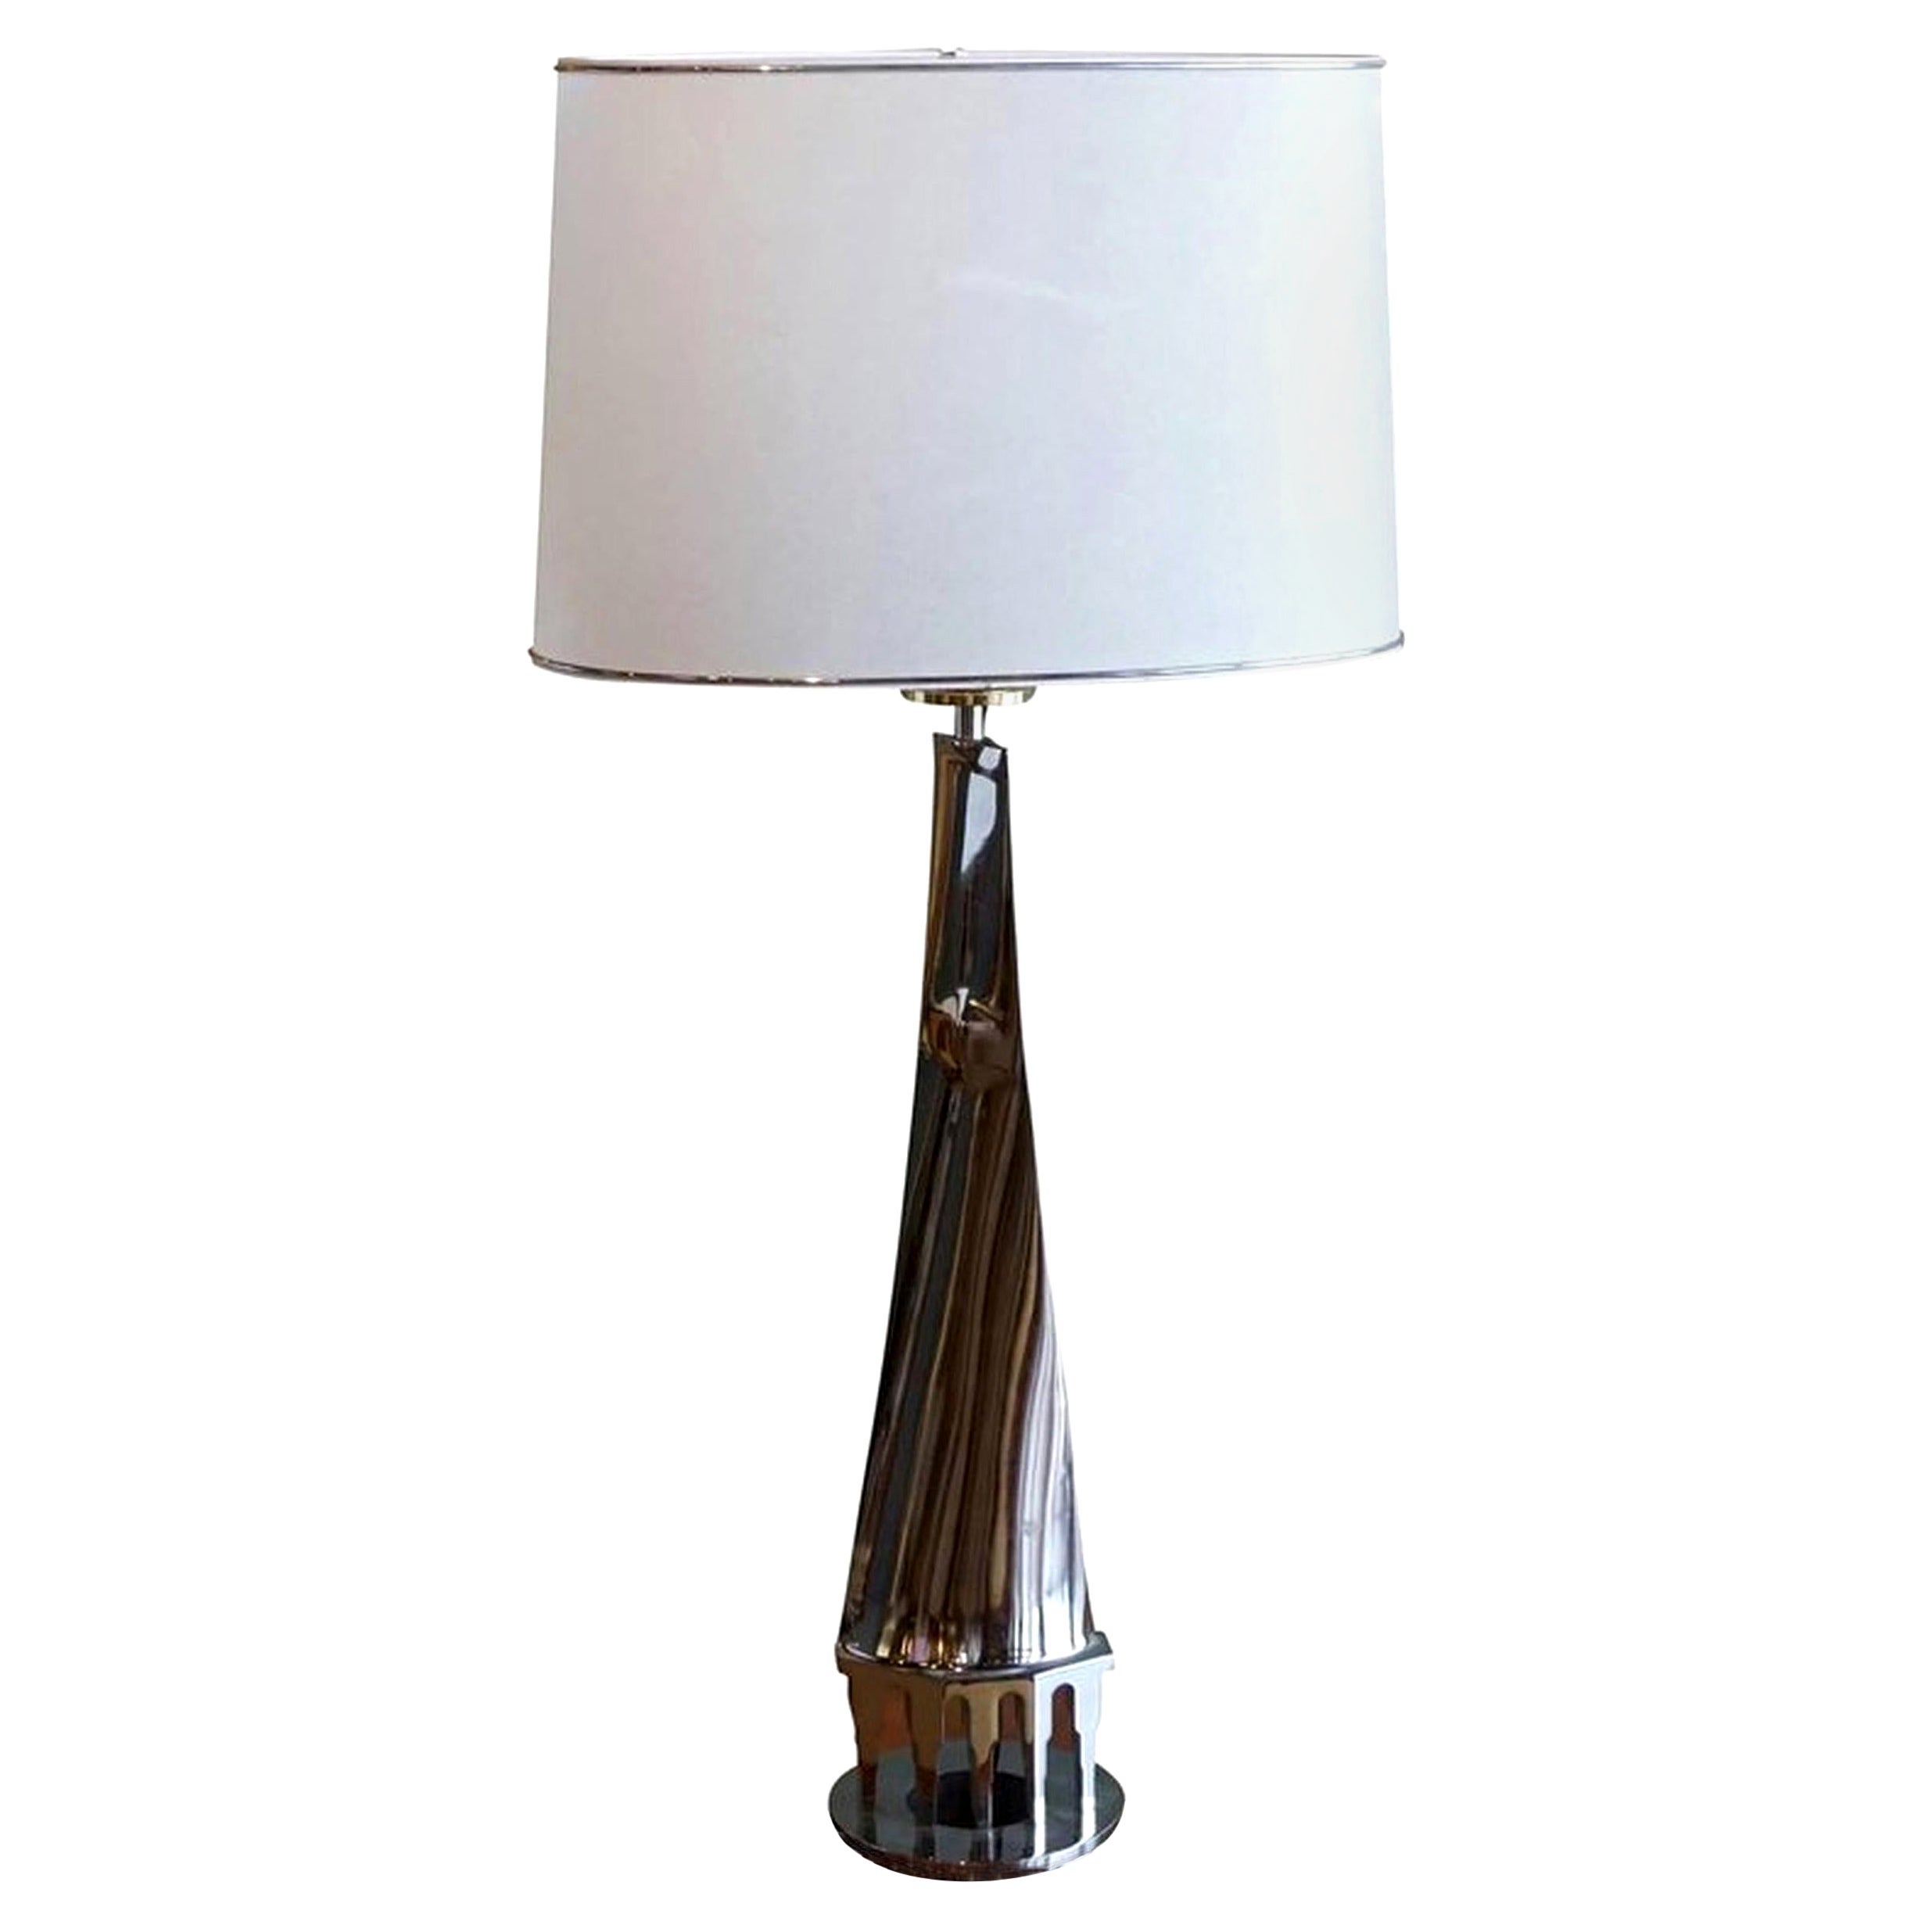 20th Century Silver Italian Florentine Chrome Table Lamp by Banci Firenze